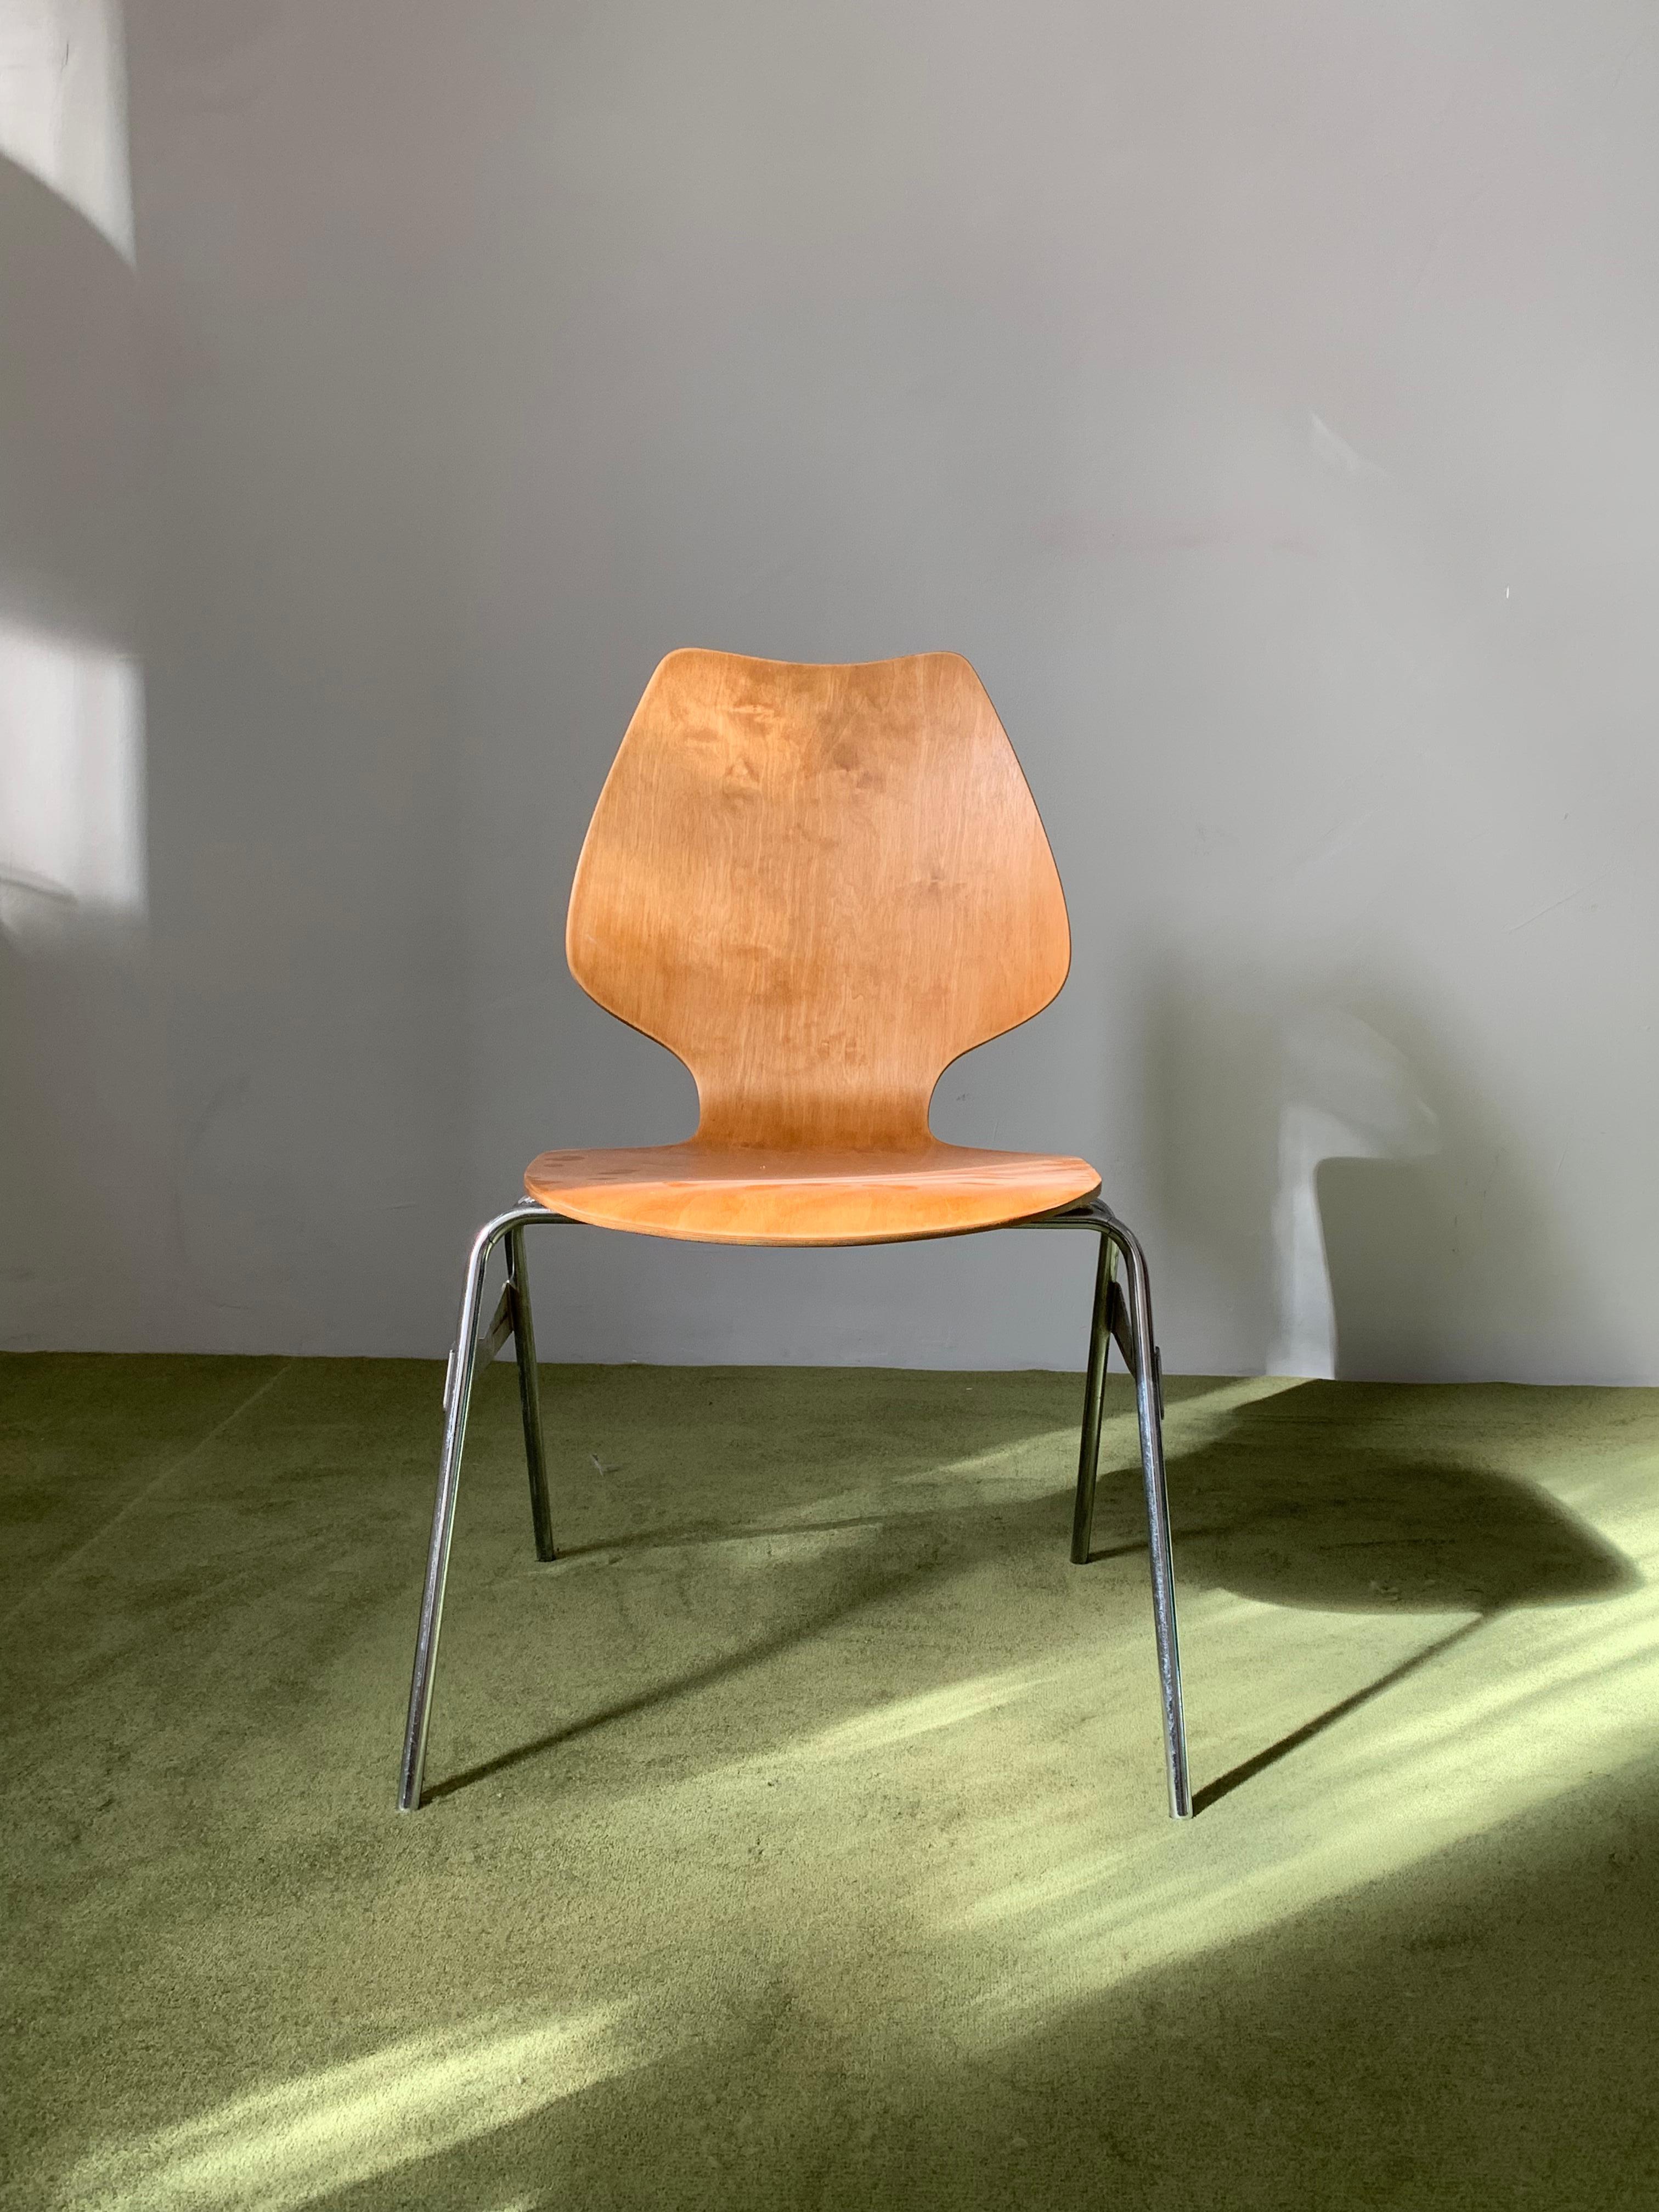 We presents this rare Vintage Swiss Industrial Design chair by Horgen Glarus. Nice mid-century design, molded plywood with tubular bent metal legs. Very comfortable, great for a desk or dining chair. Minor wear, but overall very good vintage